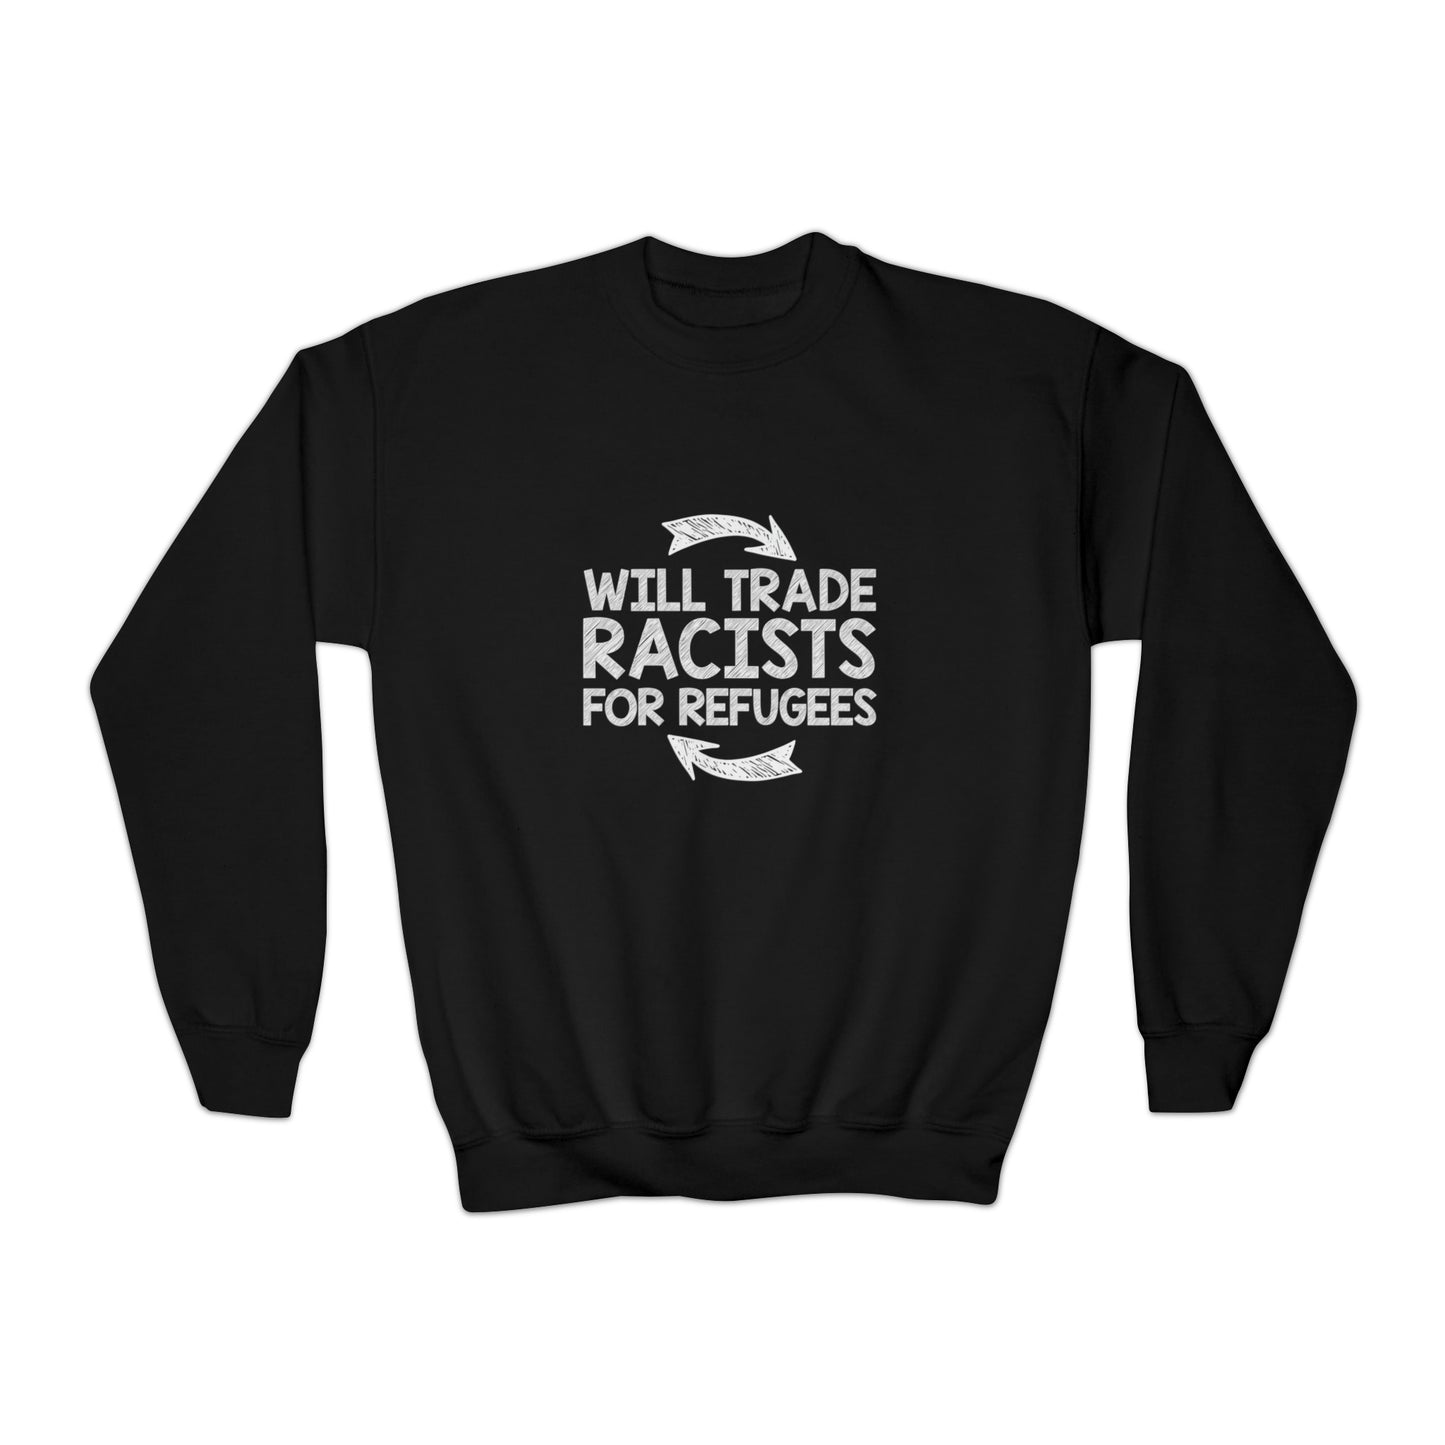 “Will Trade Racists for Refugees” Youth Sweatshirt